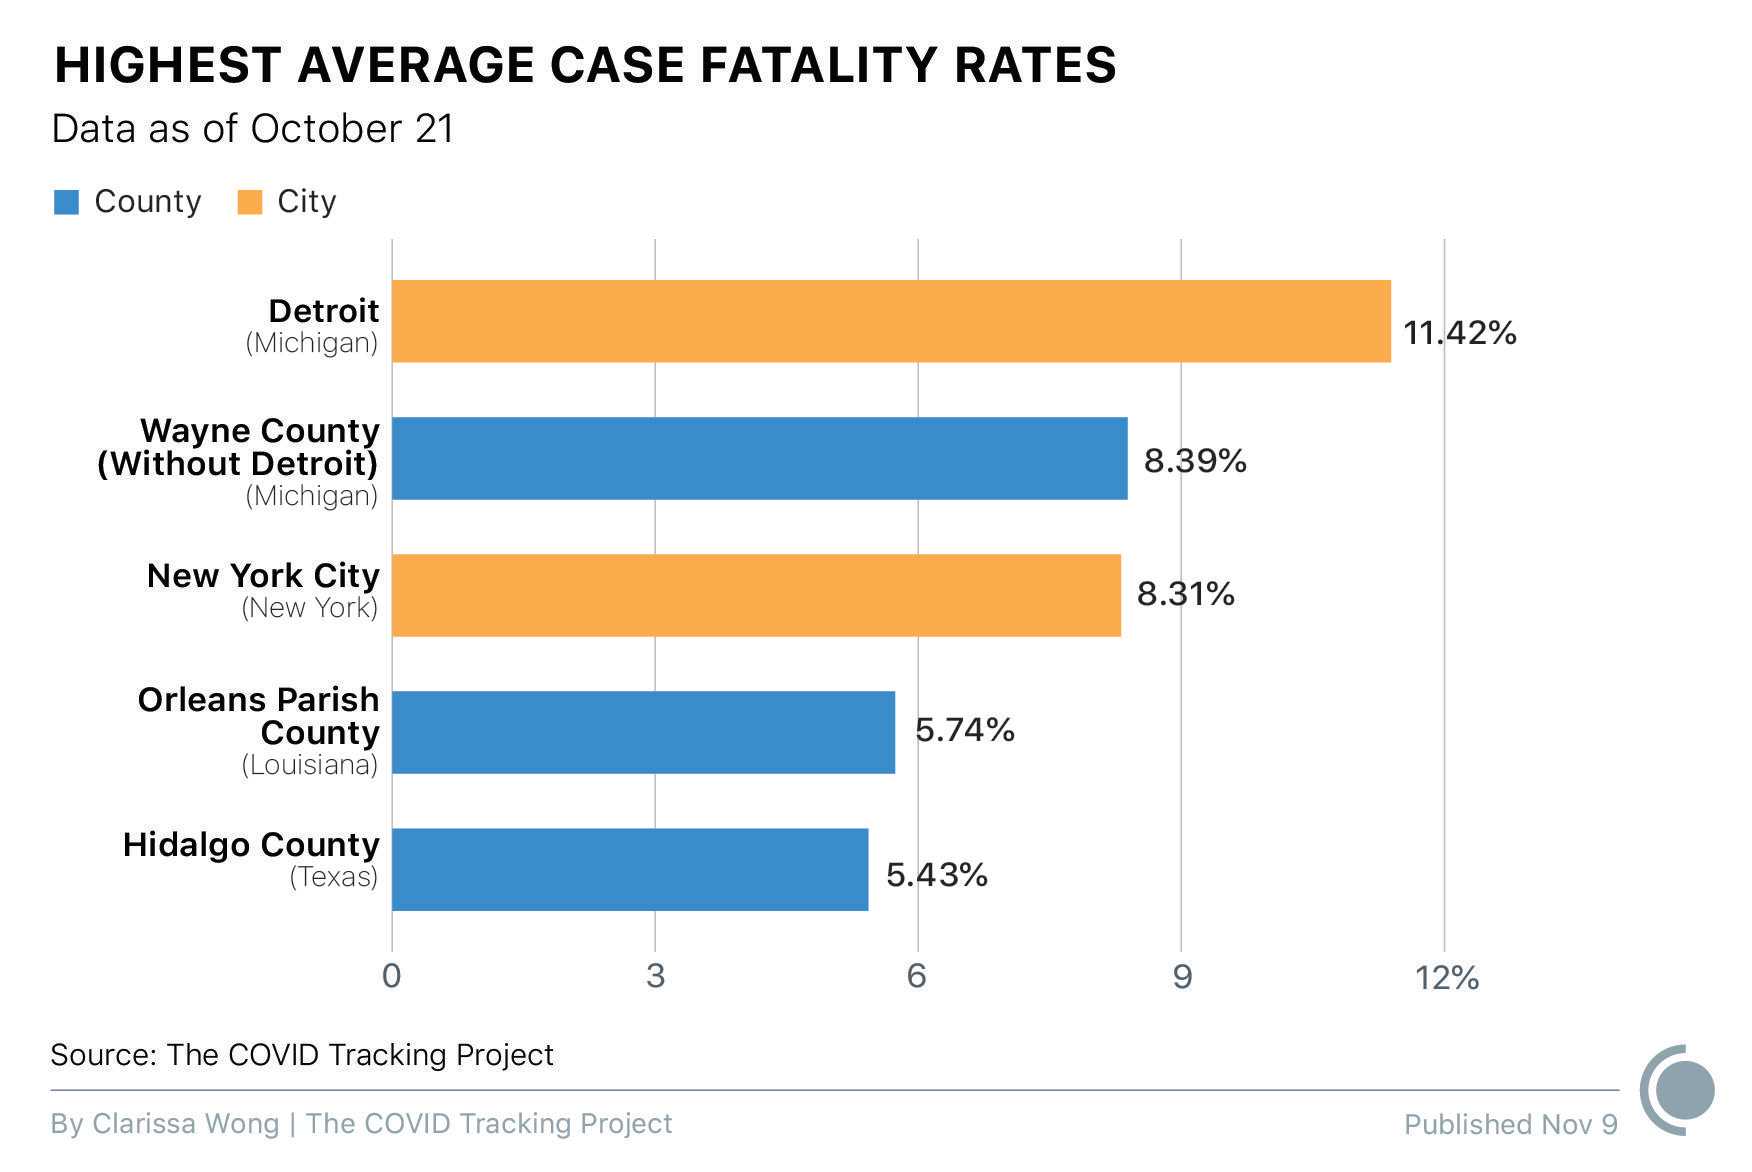 A bar graph shows the highest average case fatality rates, as of October 21. Detroit, Michigan has an average case fatality rate of 11.42%; Wayne County (excluding Detroit) in Michigan has an average CFR of 8.39%; New York City, New York has an average CFR of 8.31%; Orleans Parish County in Louisiana has an average CFR of 5.74%; and Hidalgo County, Texas has an average CFR of 5.43%.